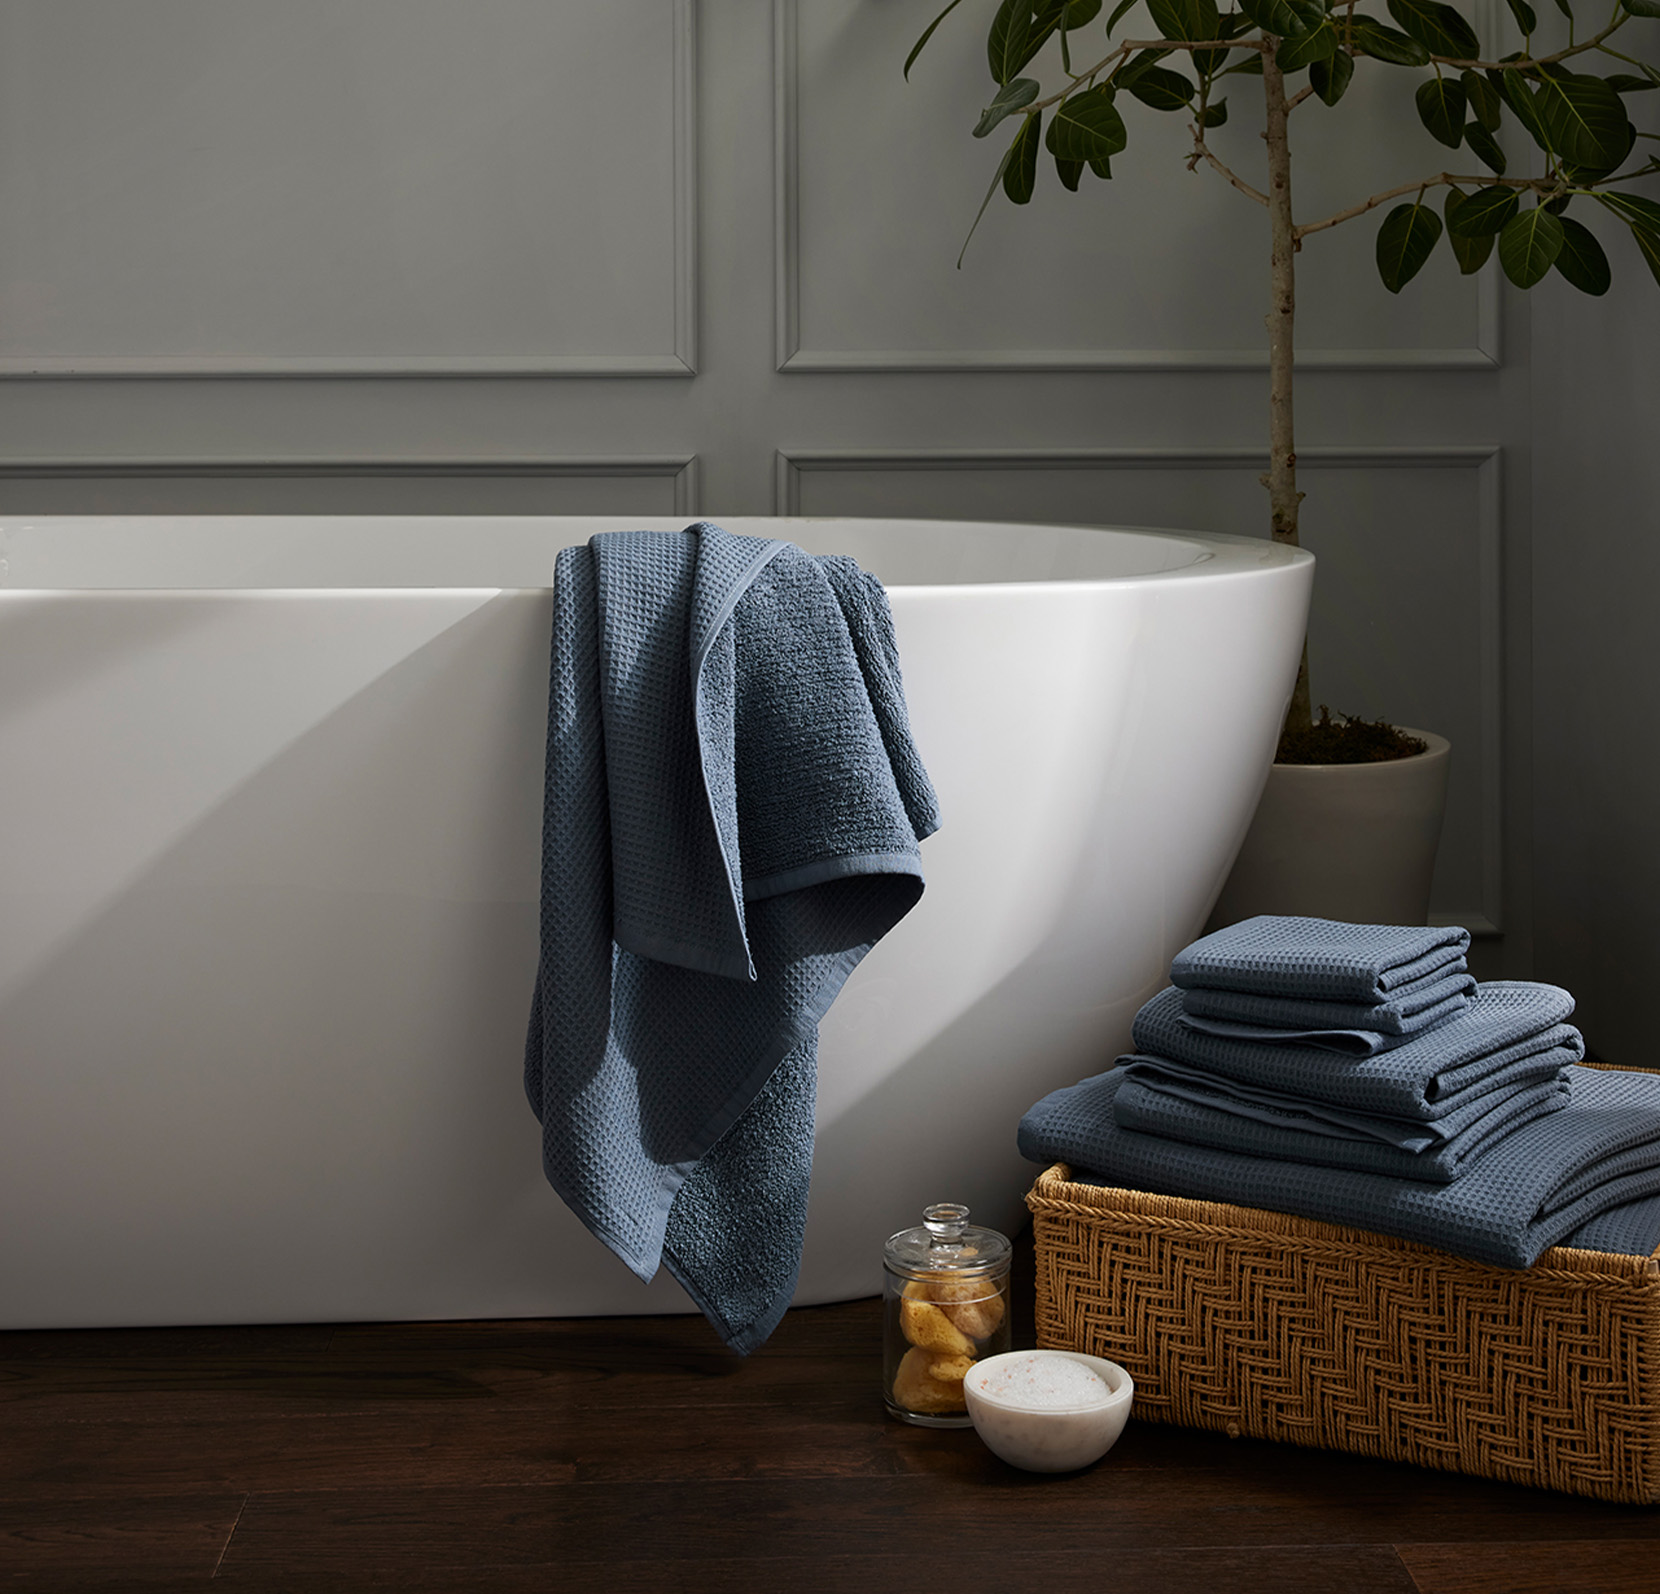 12 Organic and Sustainable Bath Towels for an Eco-Friendly